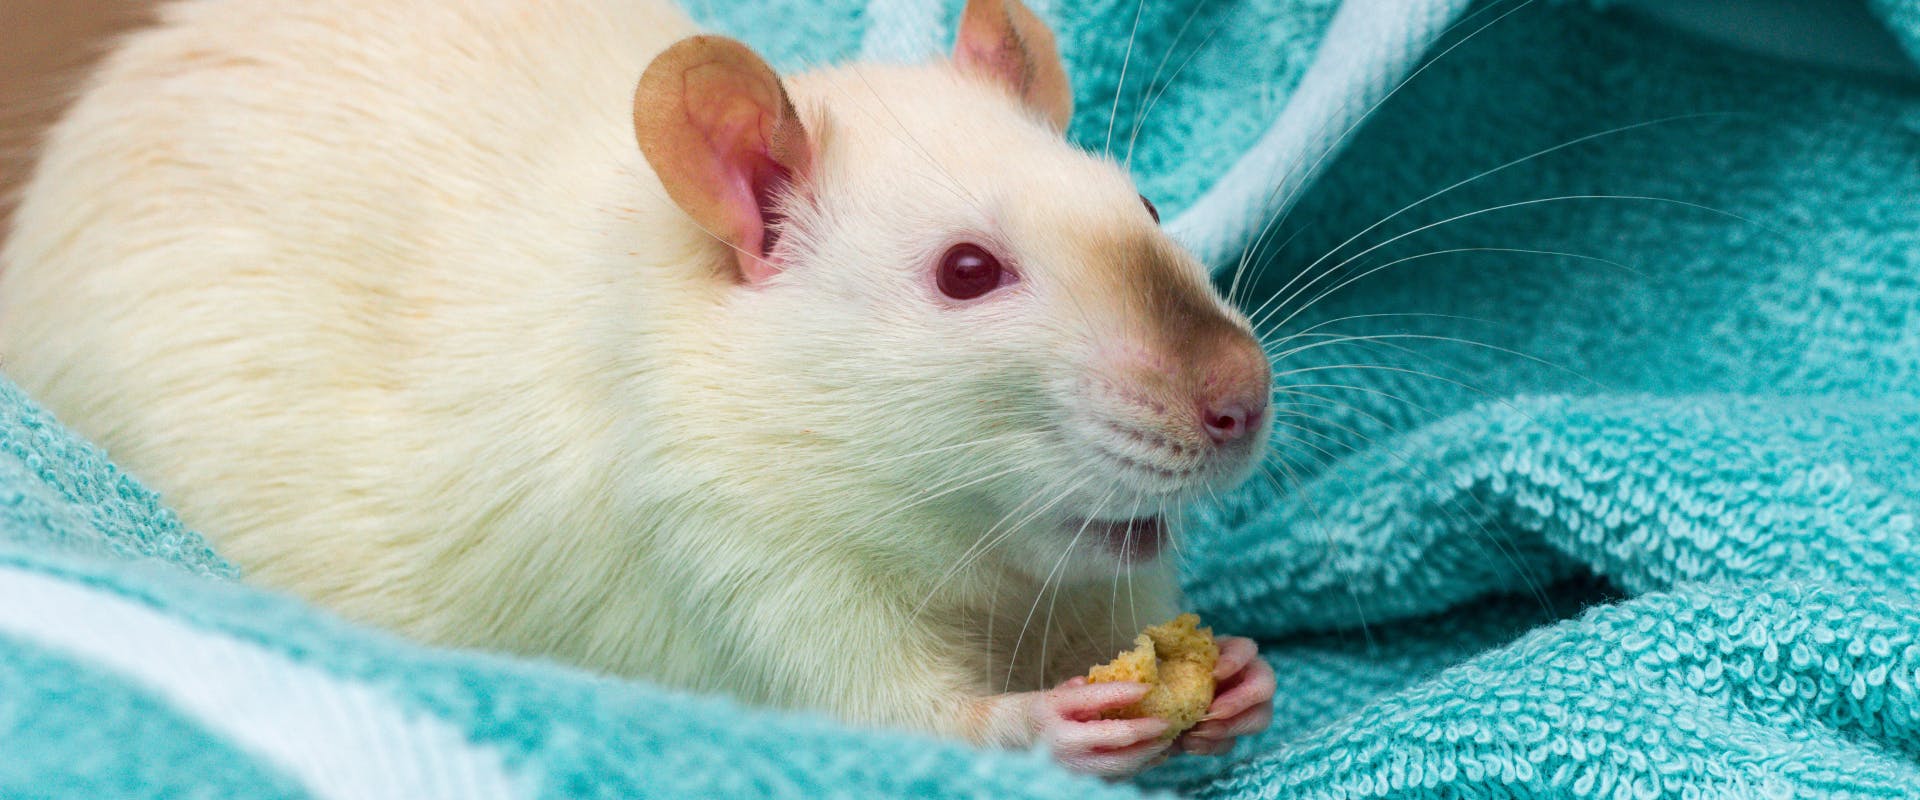 a pocket pet albino rat lying in a teal towel whilst nibbling on a some food held in its front paws